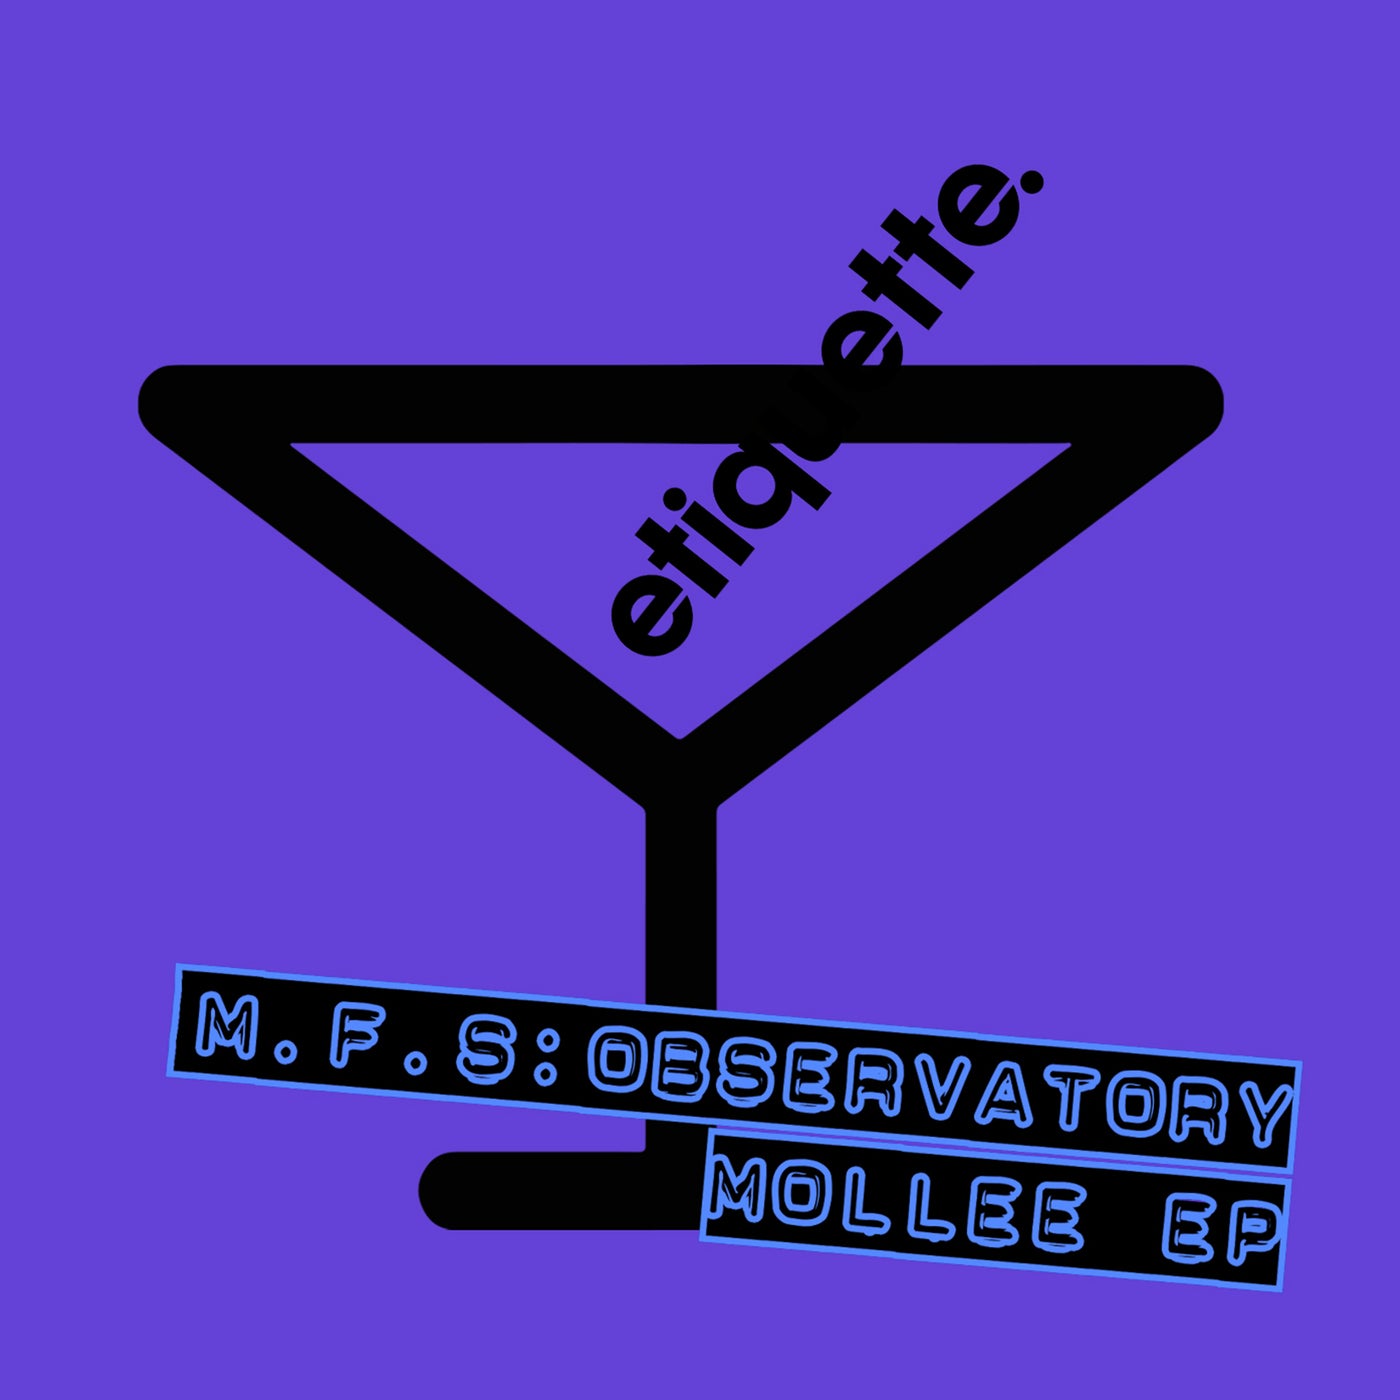 M.F.S: Observatory – Mollee EP [ETI03501Z]